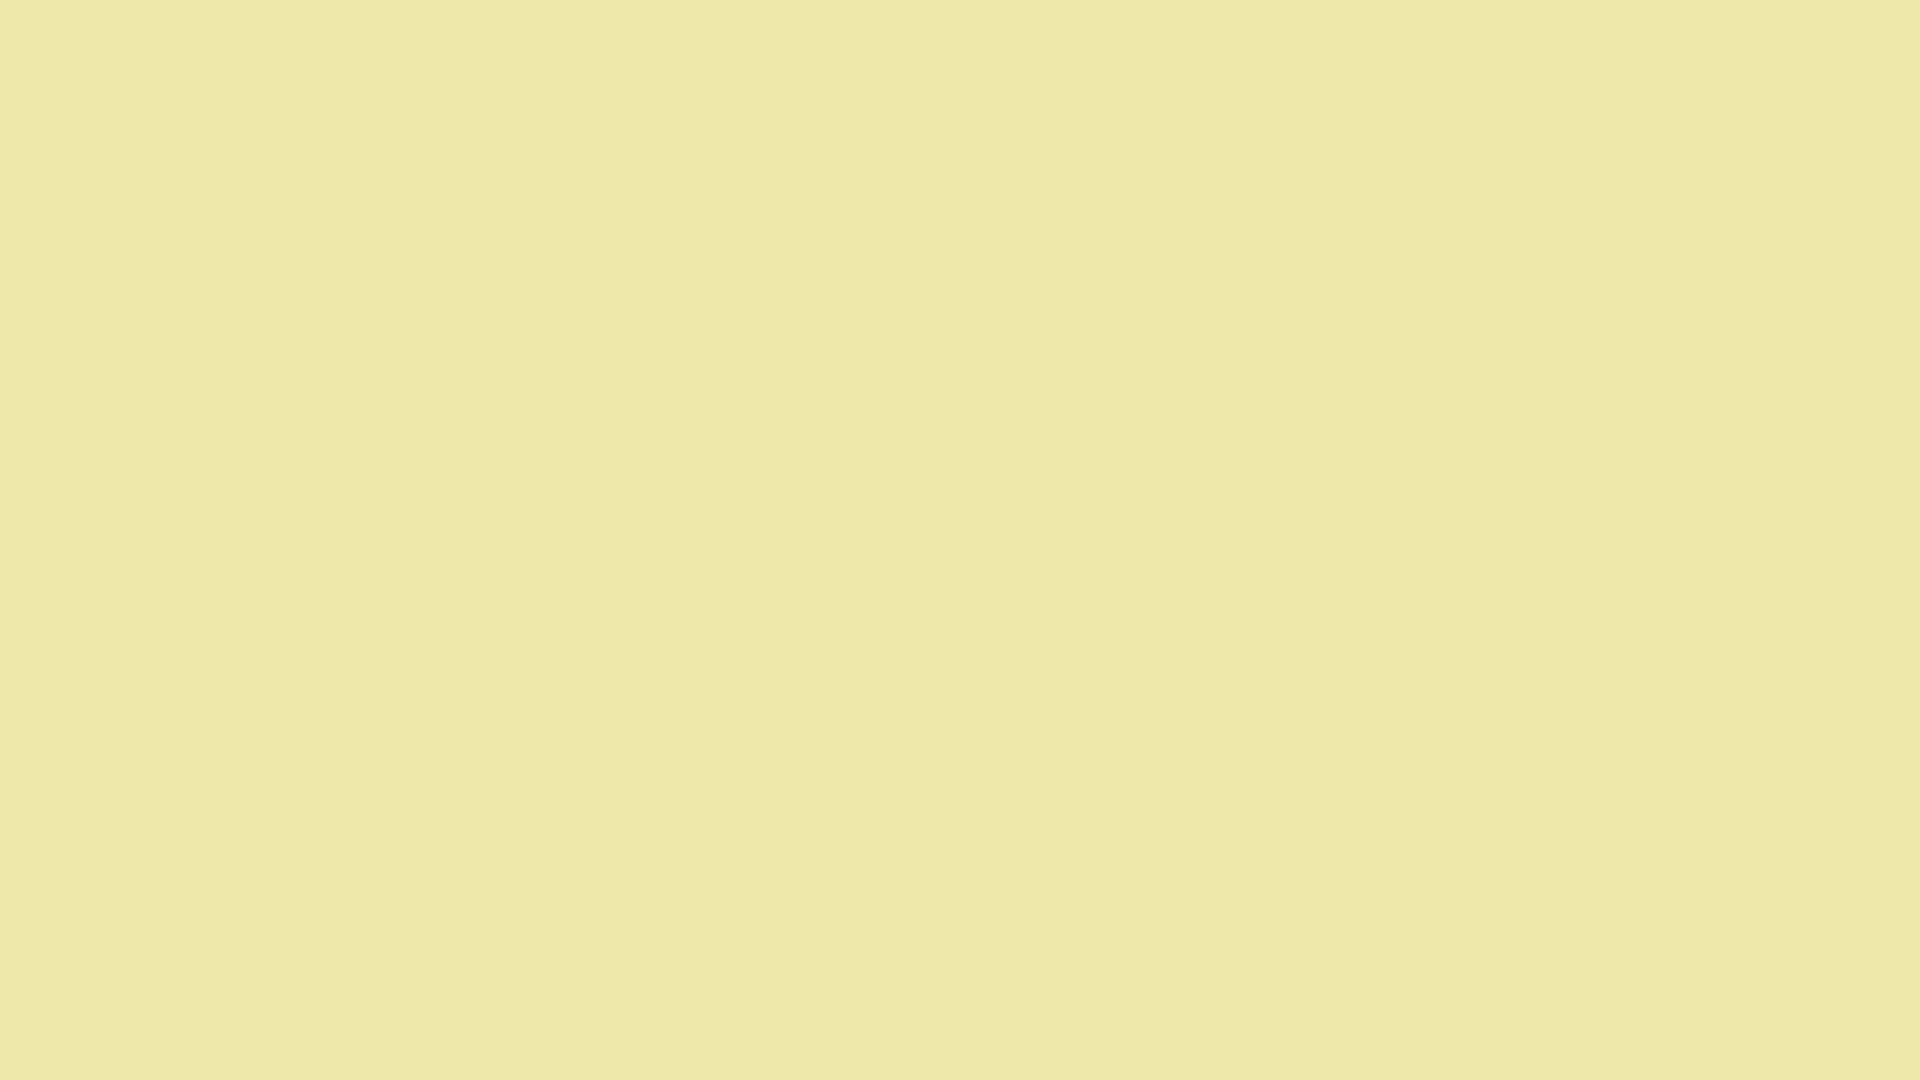 Download Vibrant Solid Yellow Wallpaper